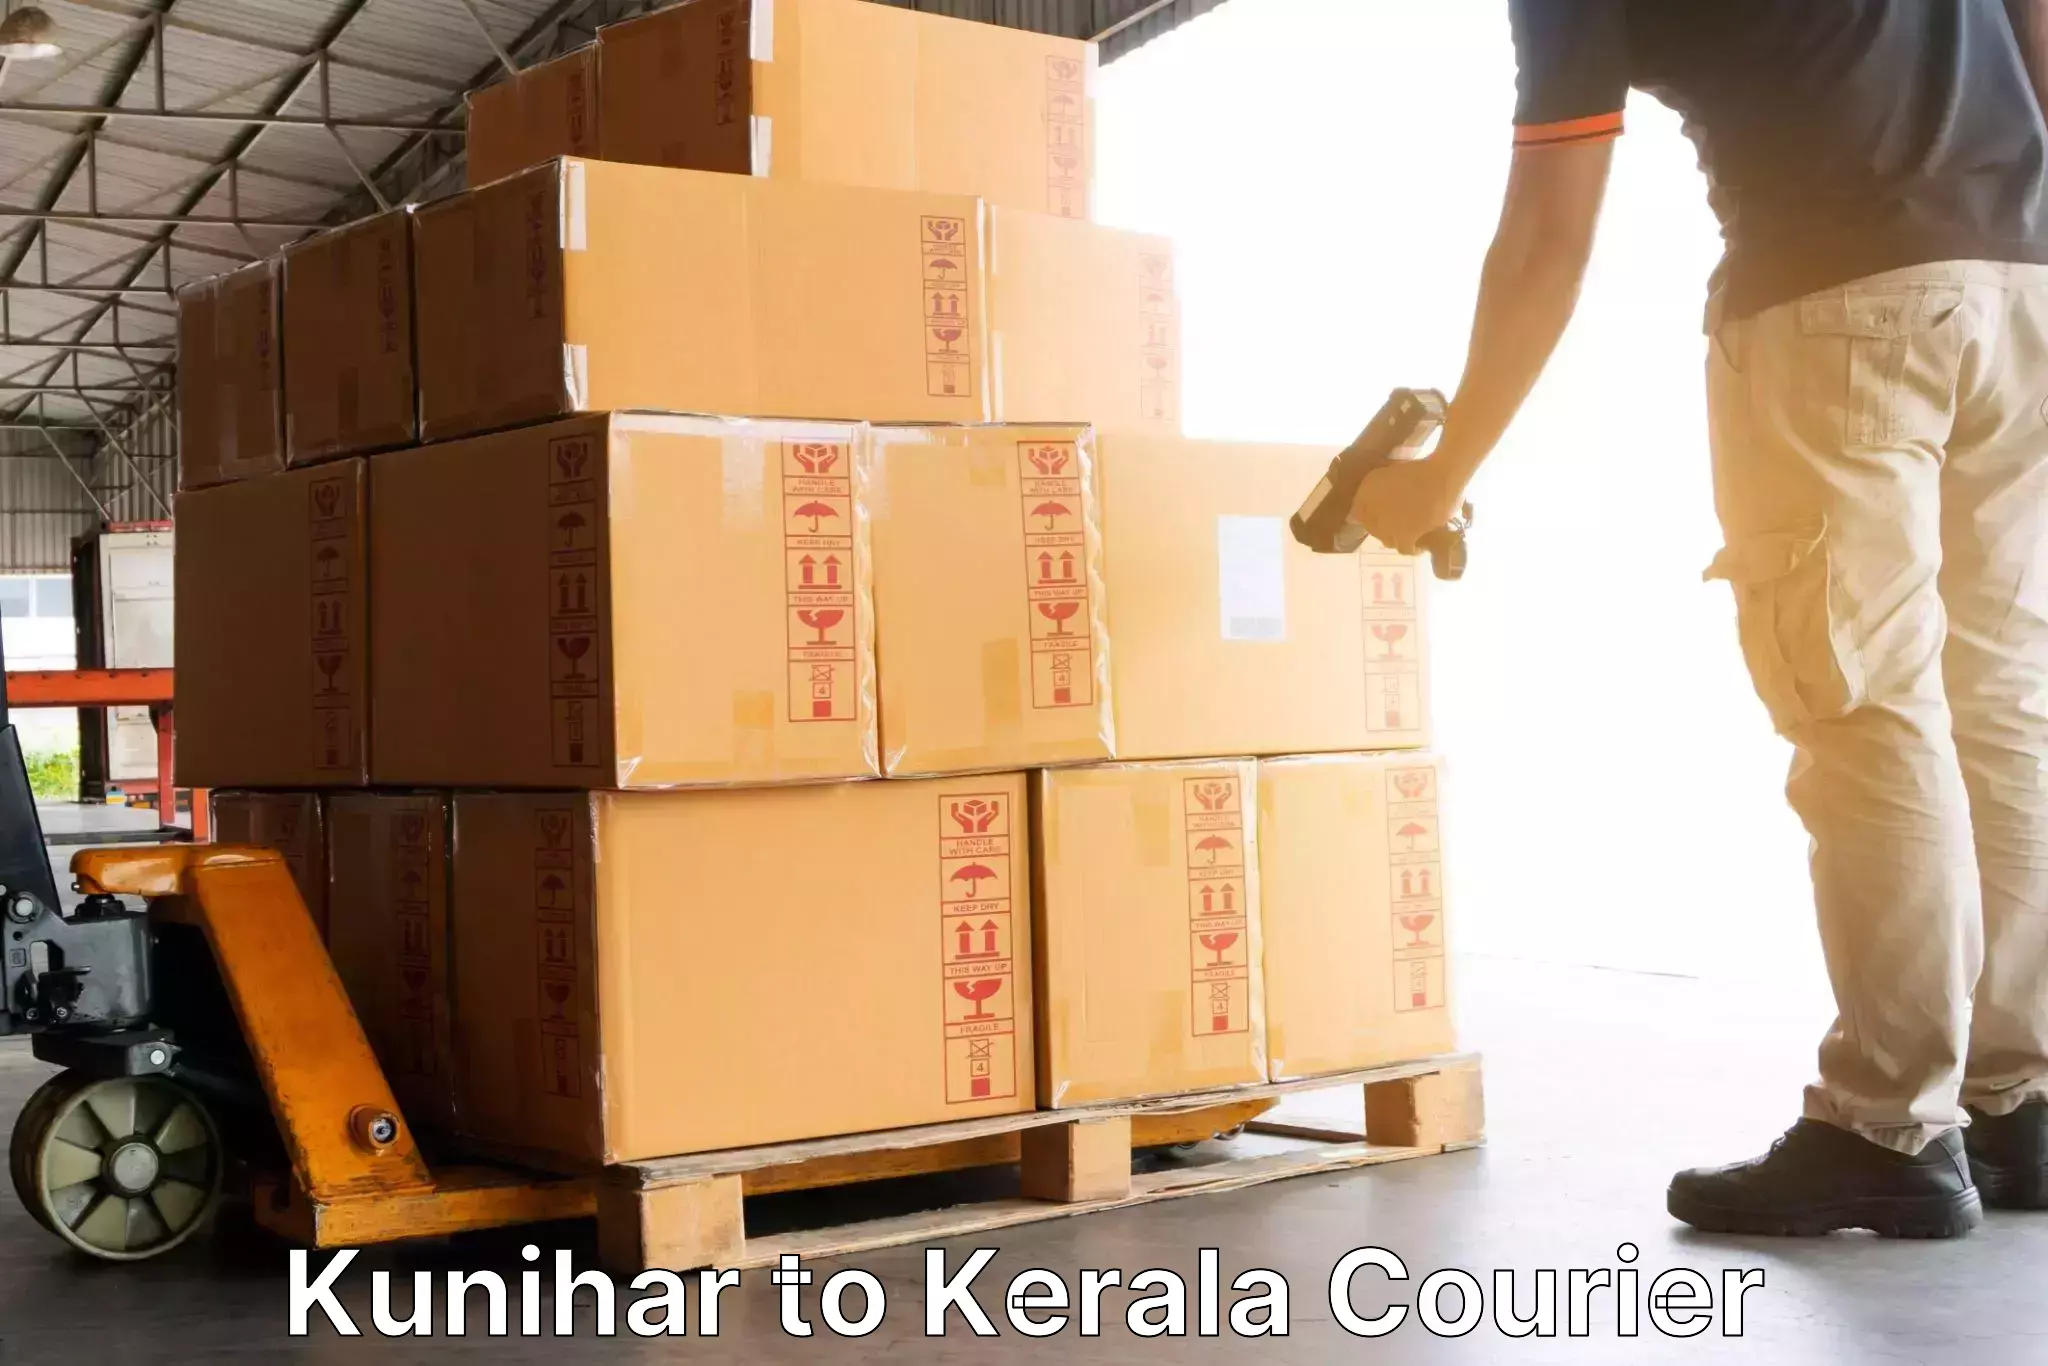 Same-day delivery solutions Kunihar to Kerala